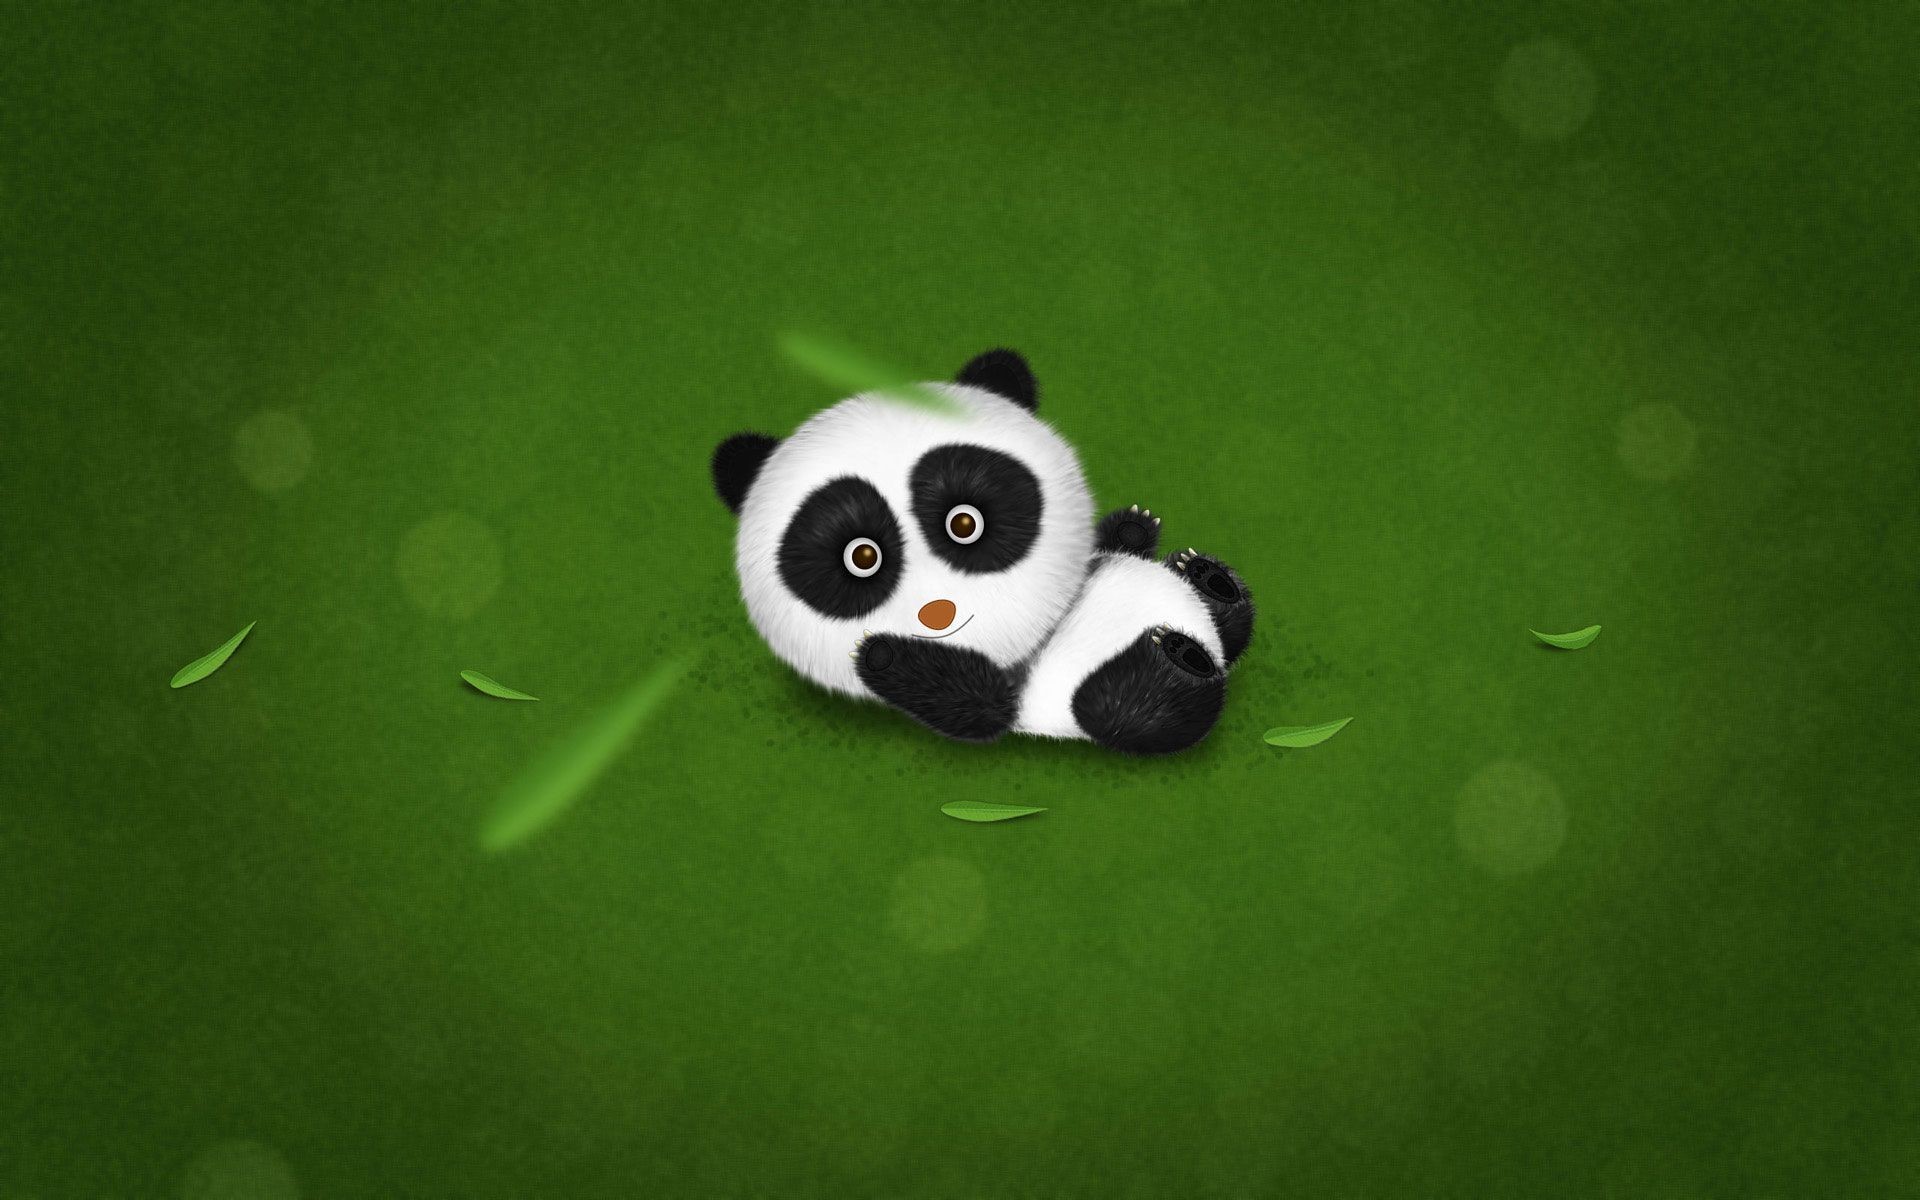 Cute Panda Wallpapers Android Apps on Google Play 19201200 Panda Images Wallpapers 34